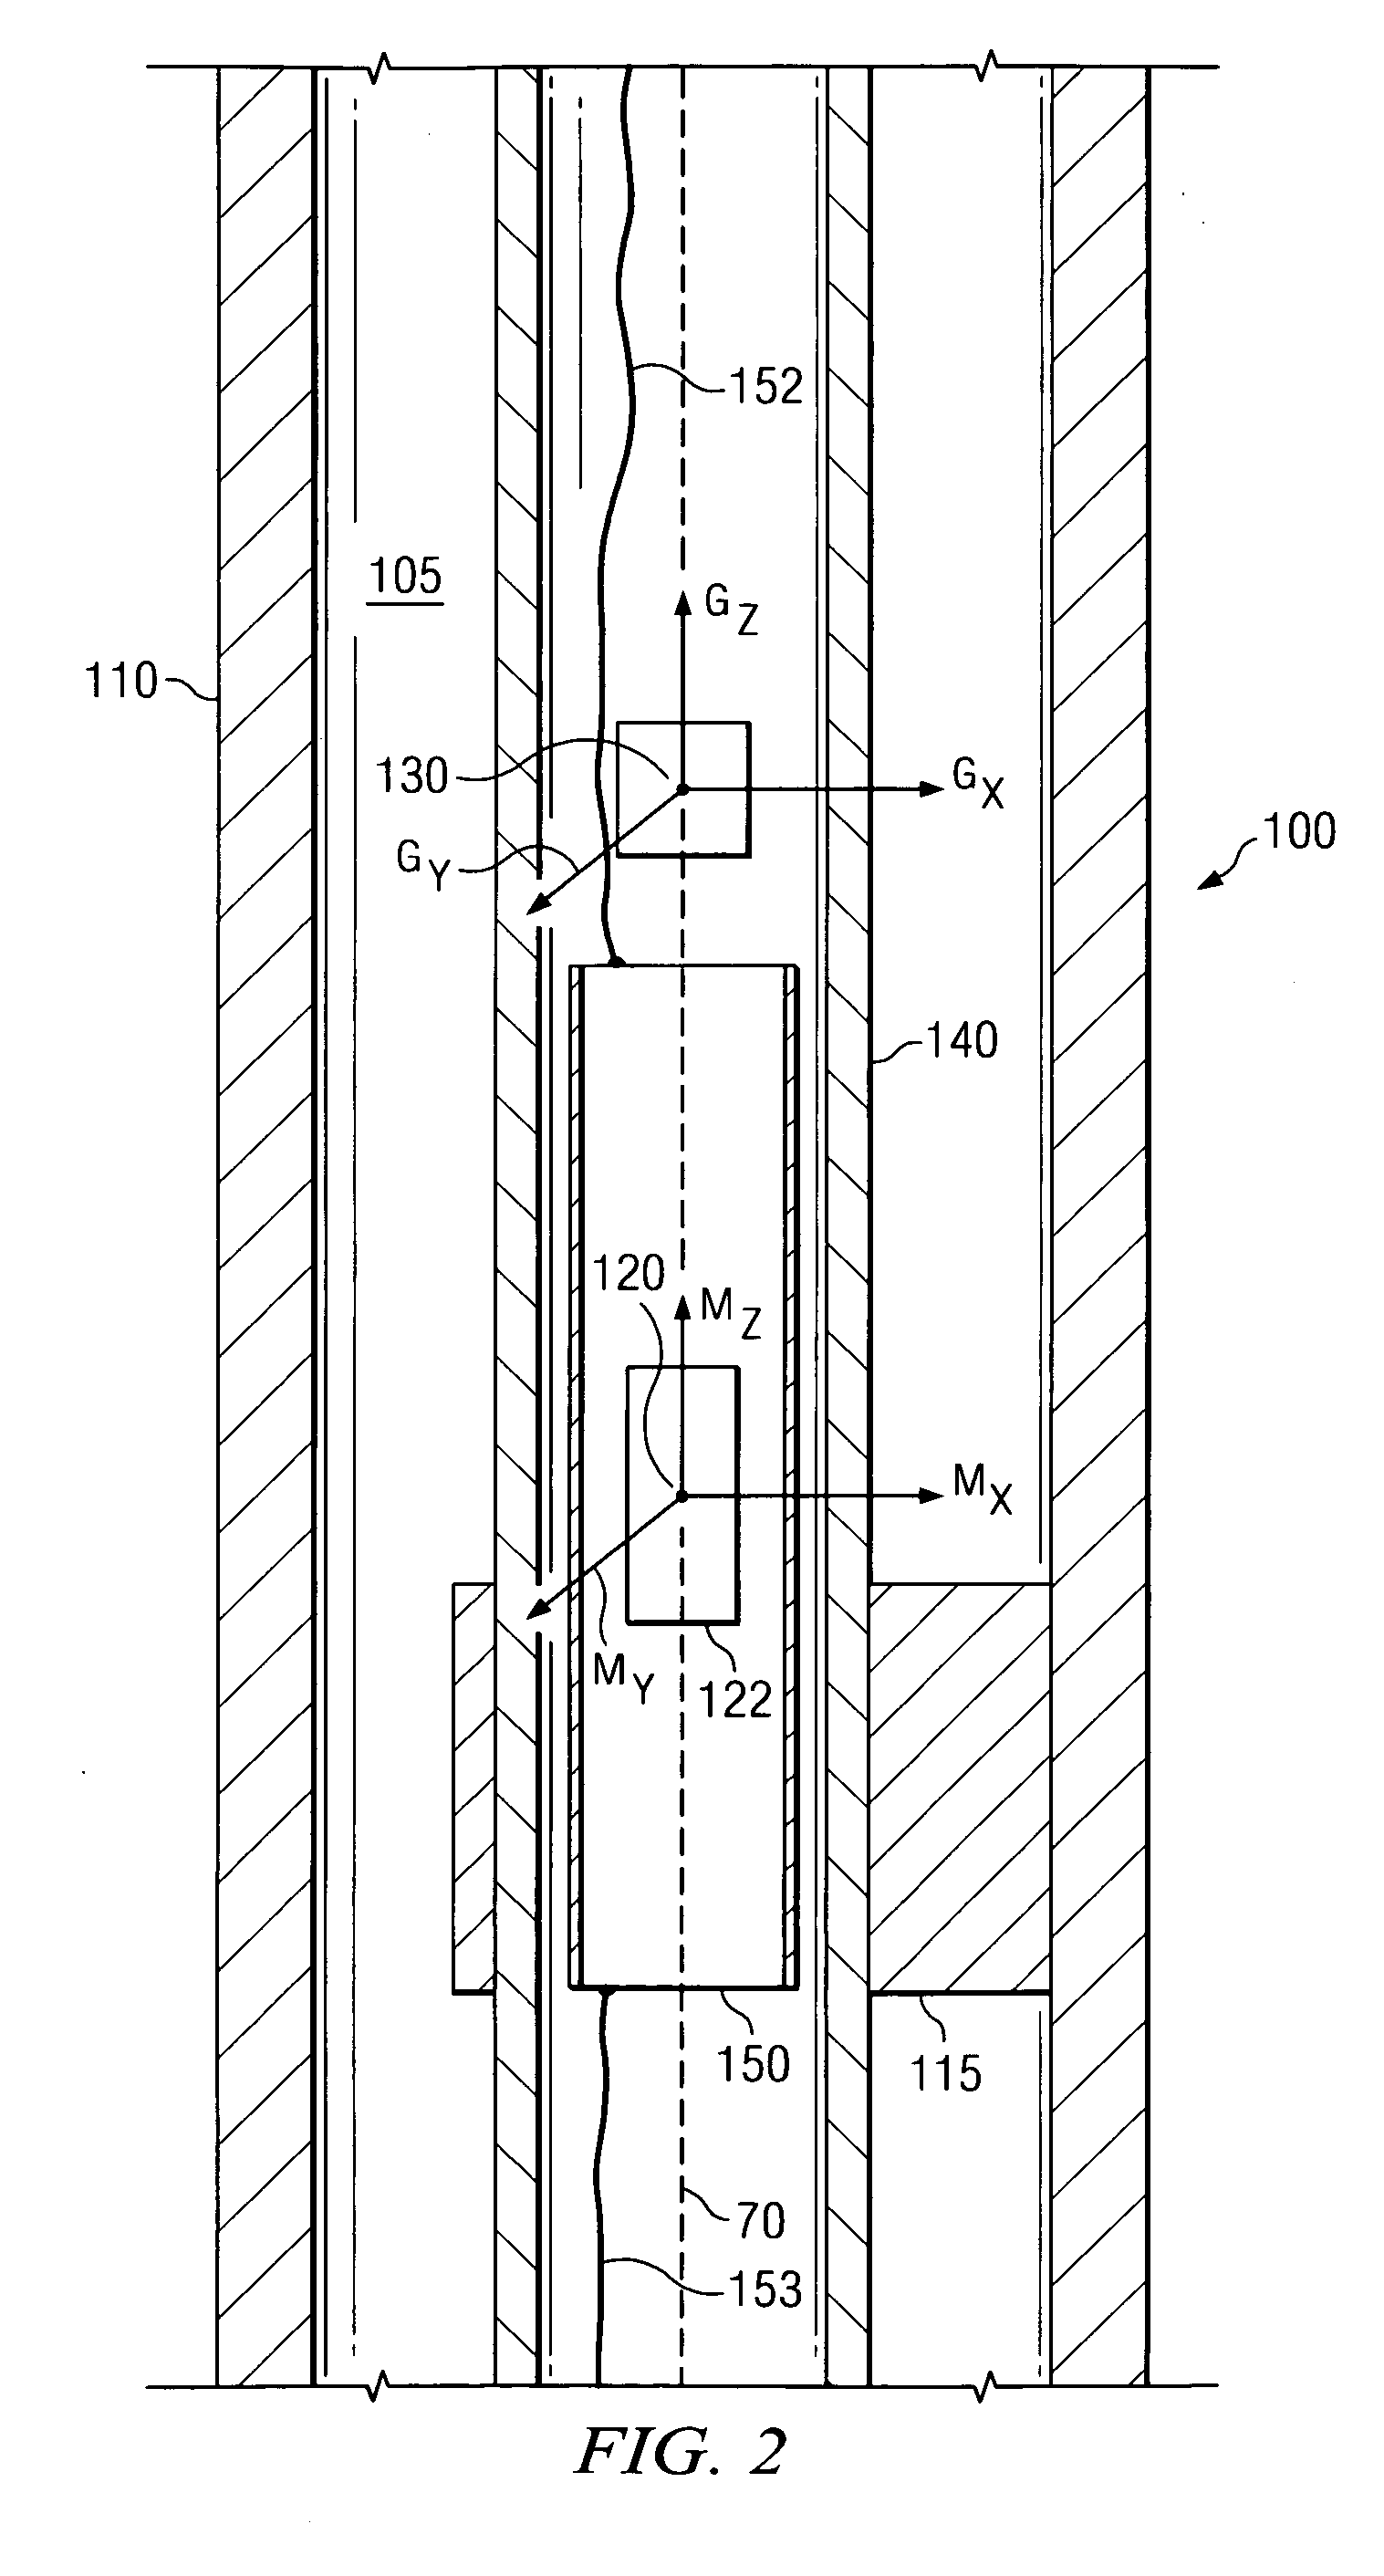 Measurement tool for obtaining tool face on a rotating drill collar